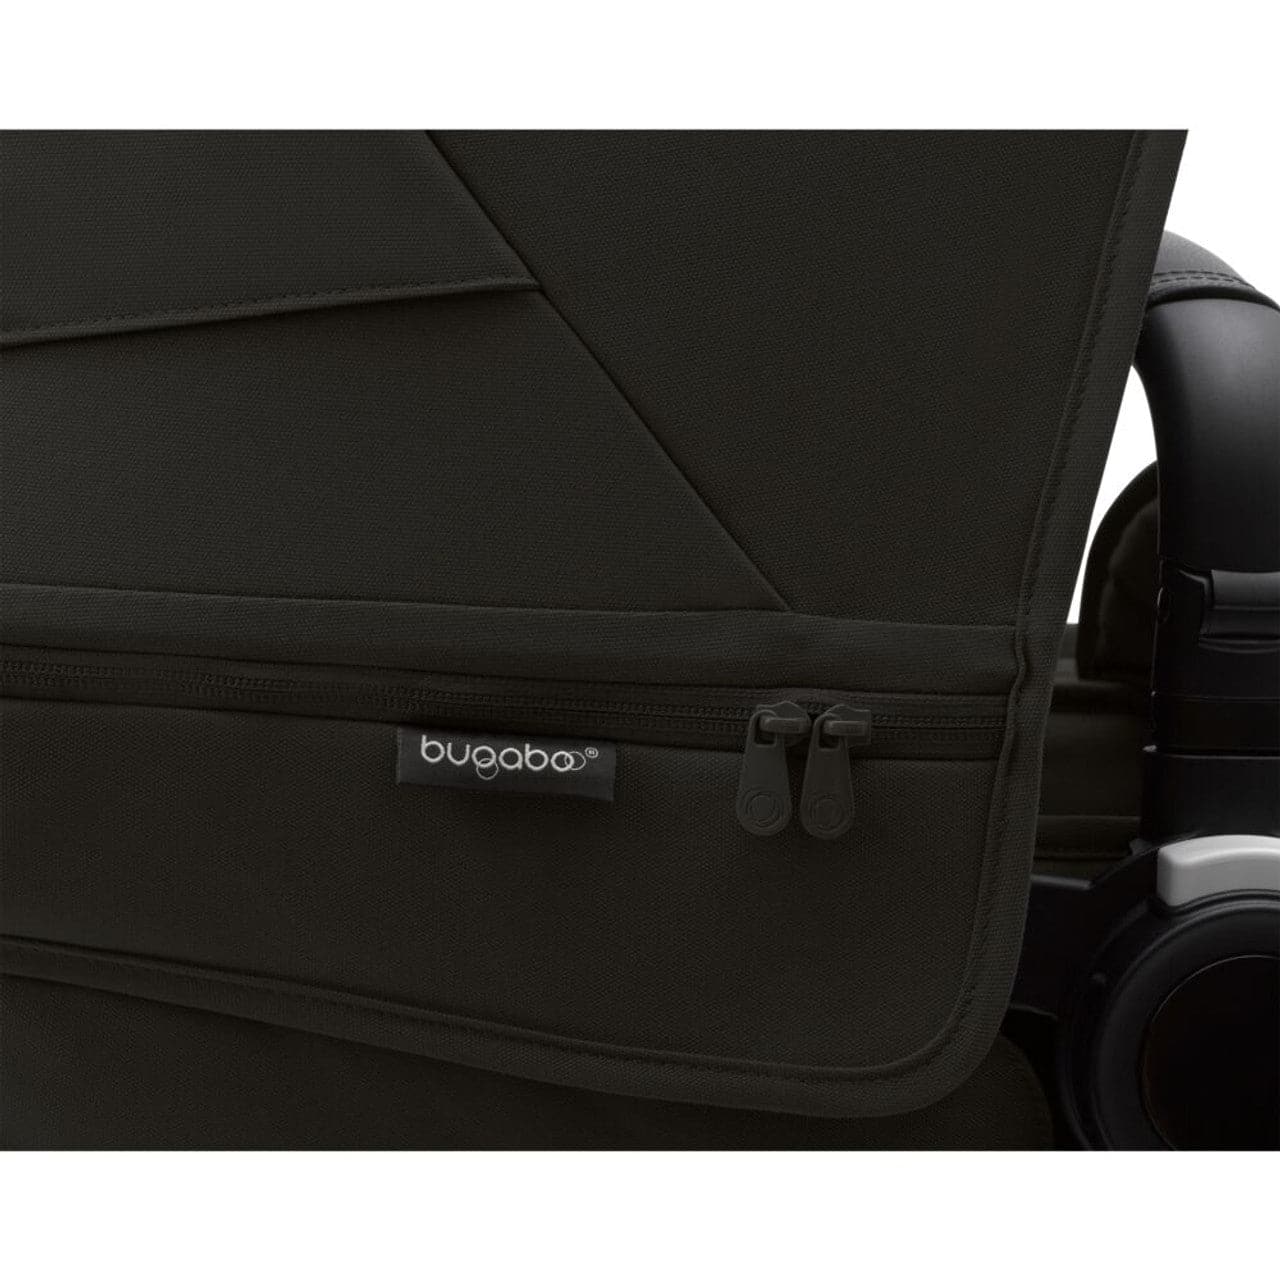 Bugaboo Donkey 5 Twin Pushchair on Graphite/Black Chassis - Choose Your Colour - For Your Little One